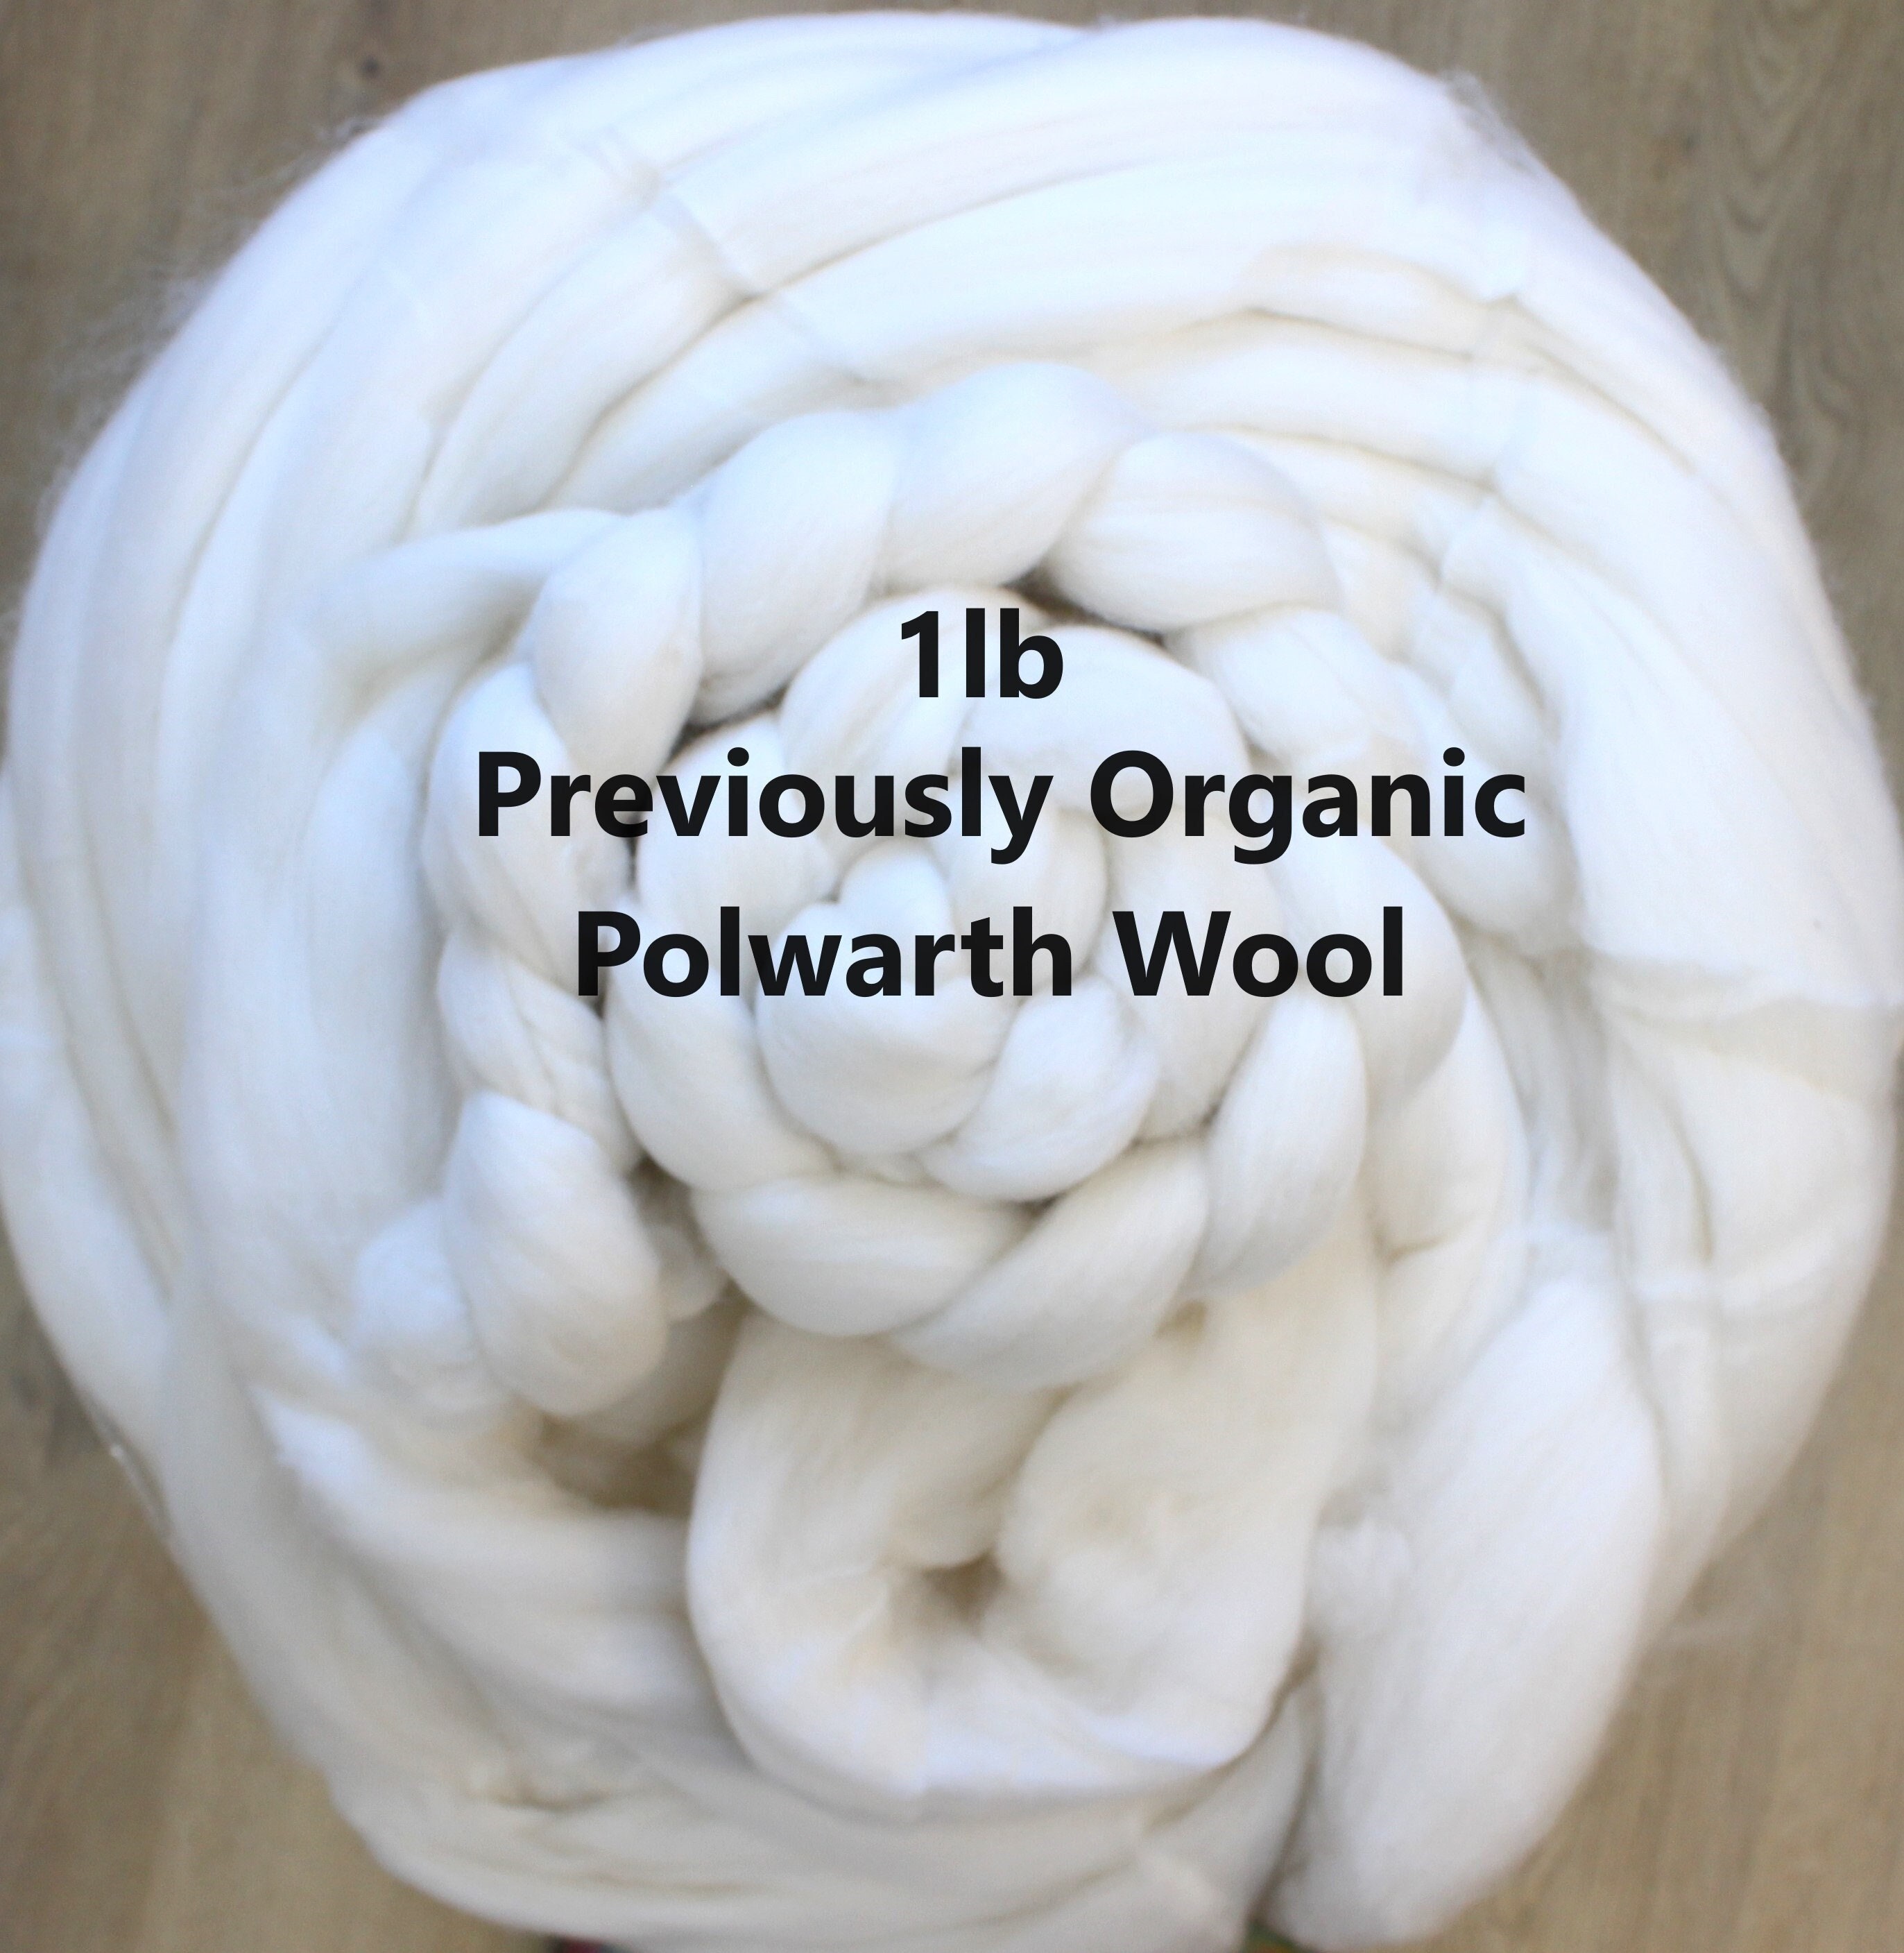 Kondoos Multi Colored Natural Wool roving 1 lb. Best Wool for Needle Felting  Wet Felting handcrafts and Spinning. (Dawn 1lb)